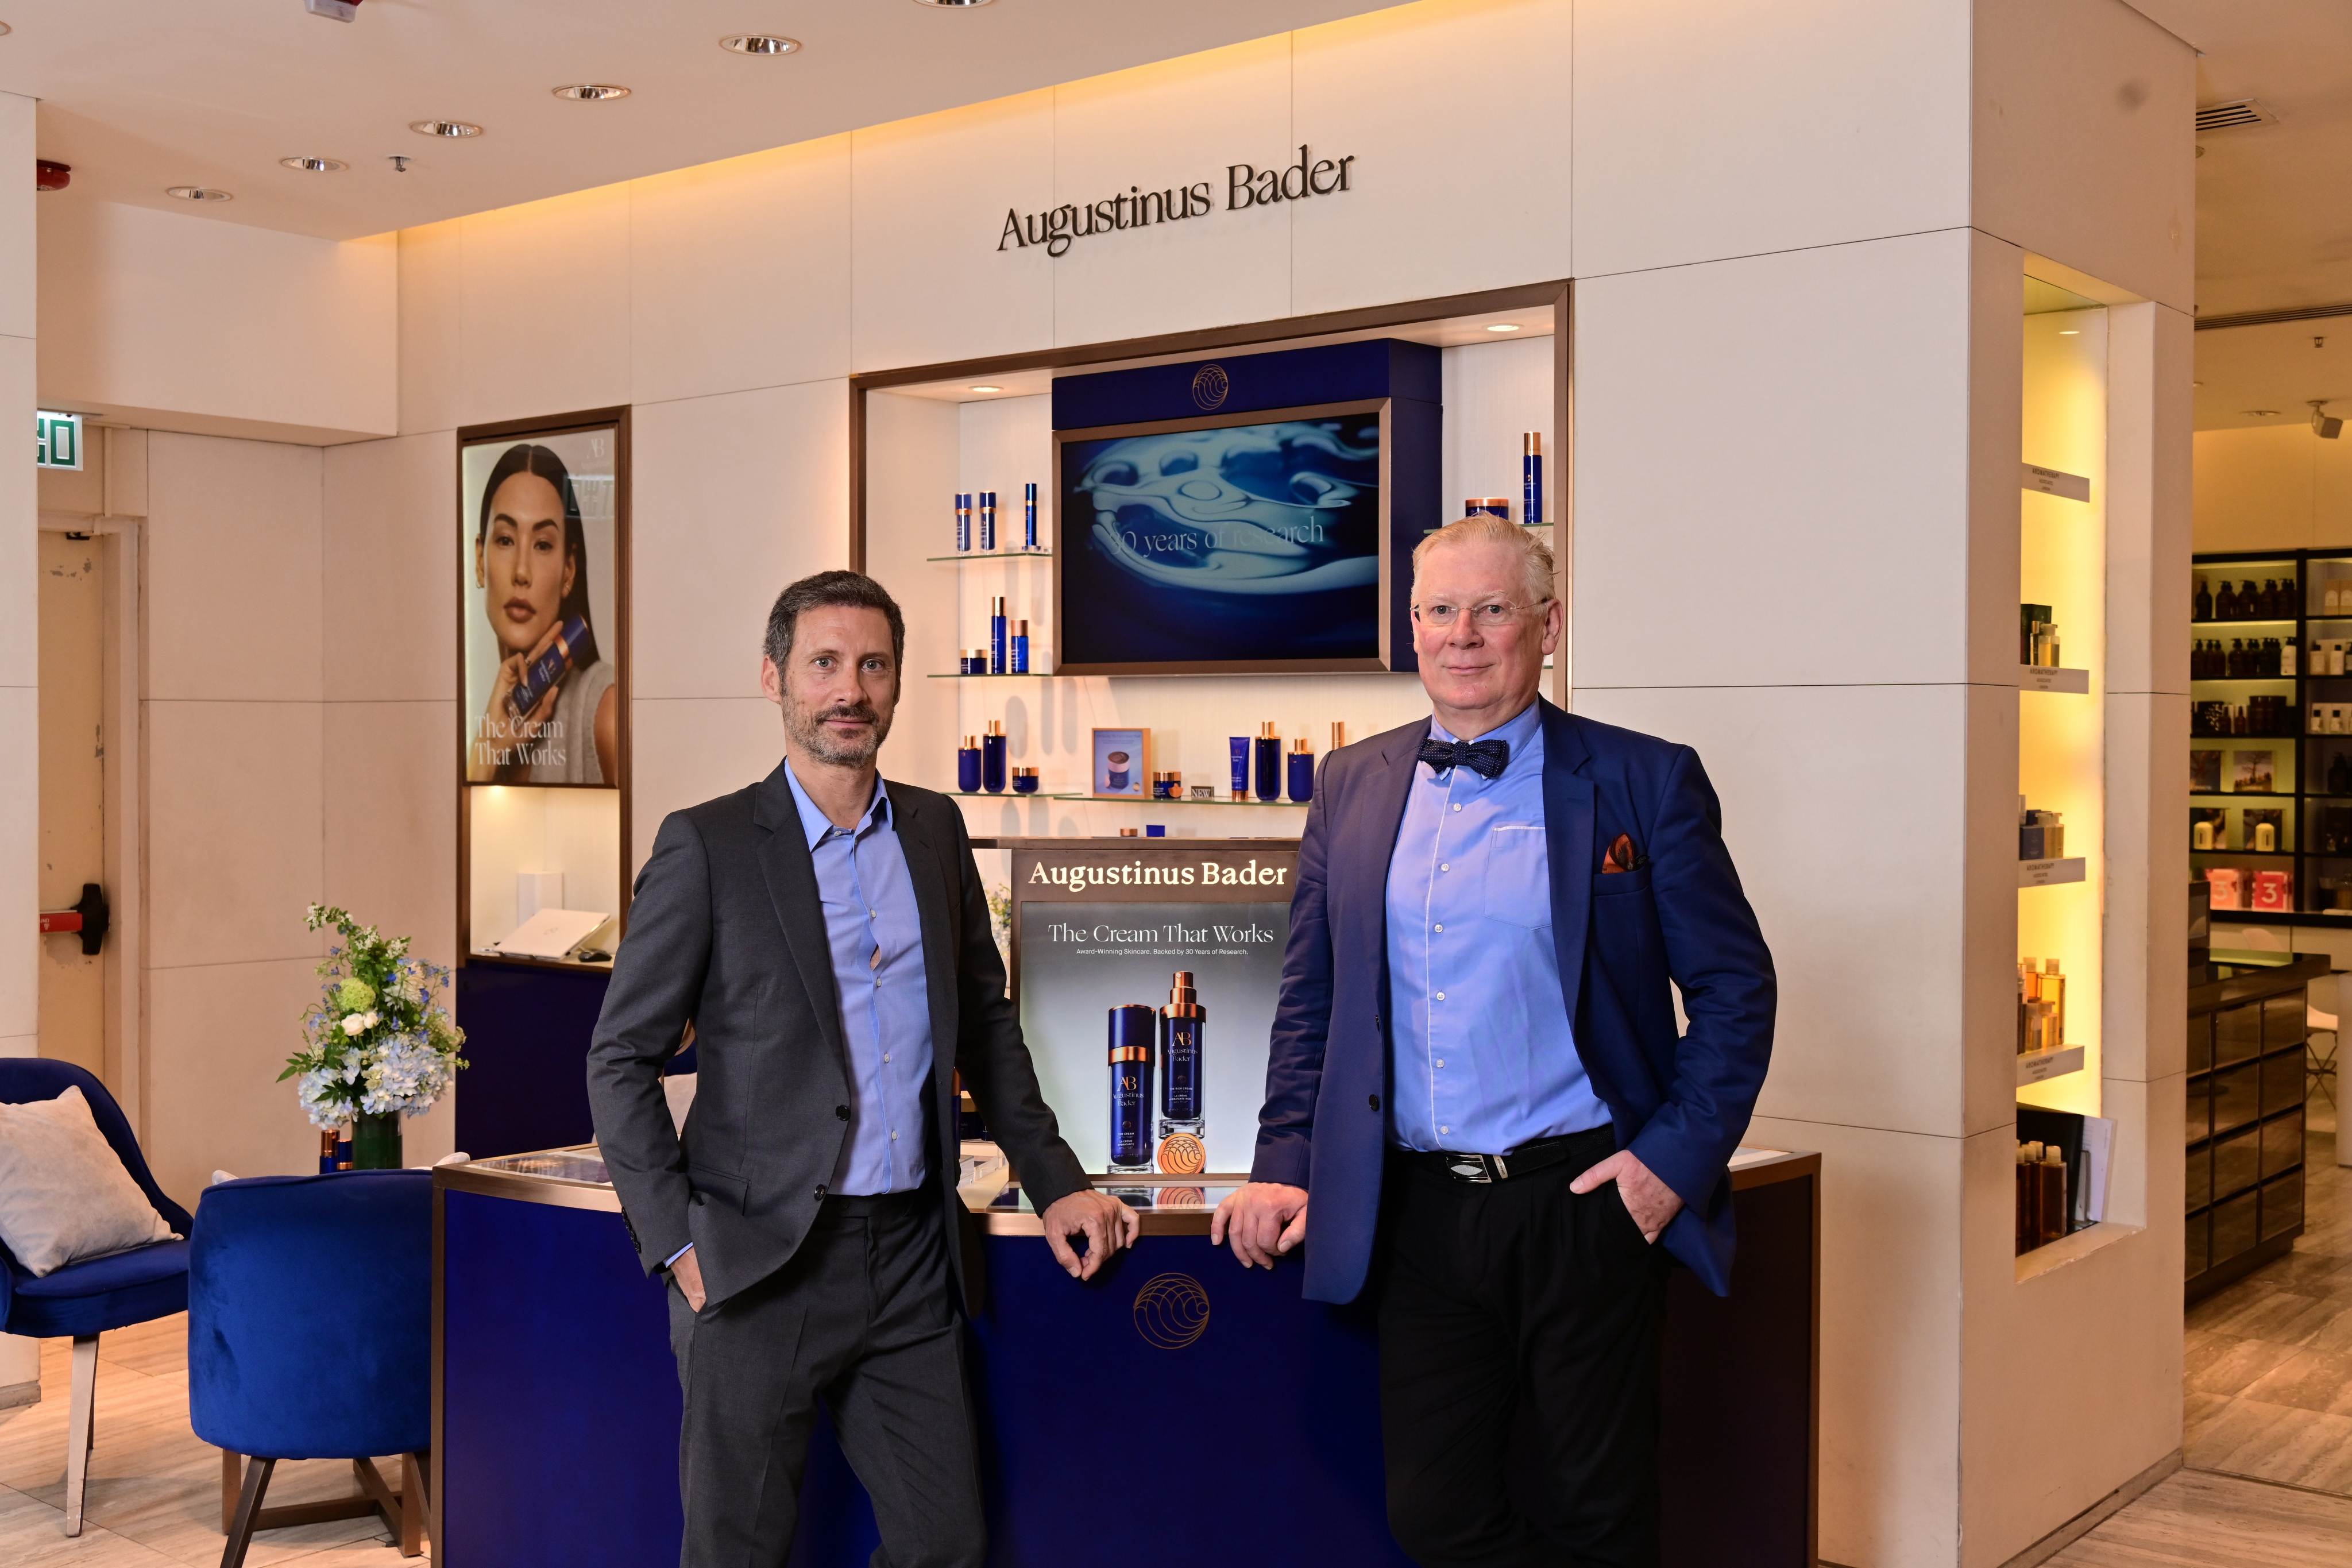 Professor Augustinus Bader (right) and the skincare brand’s CEO Charles Rosier discuss how they have made a retinol serum “without the drawbacks”.